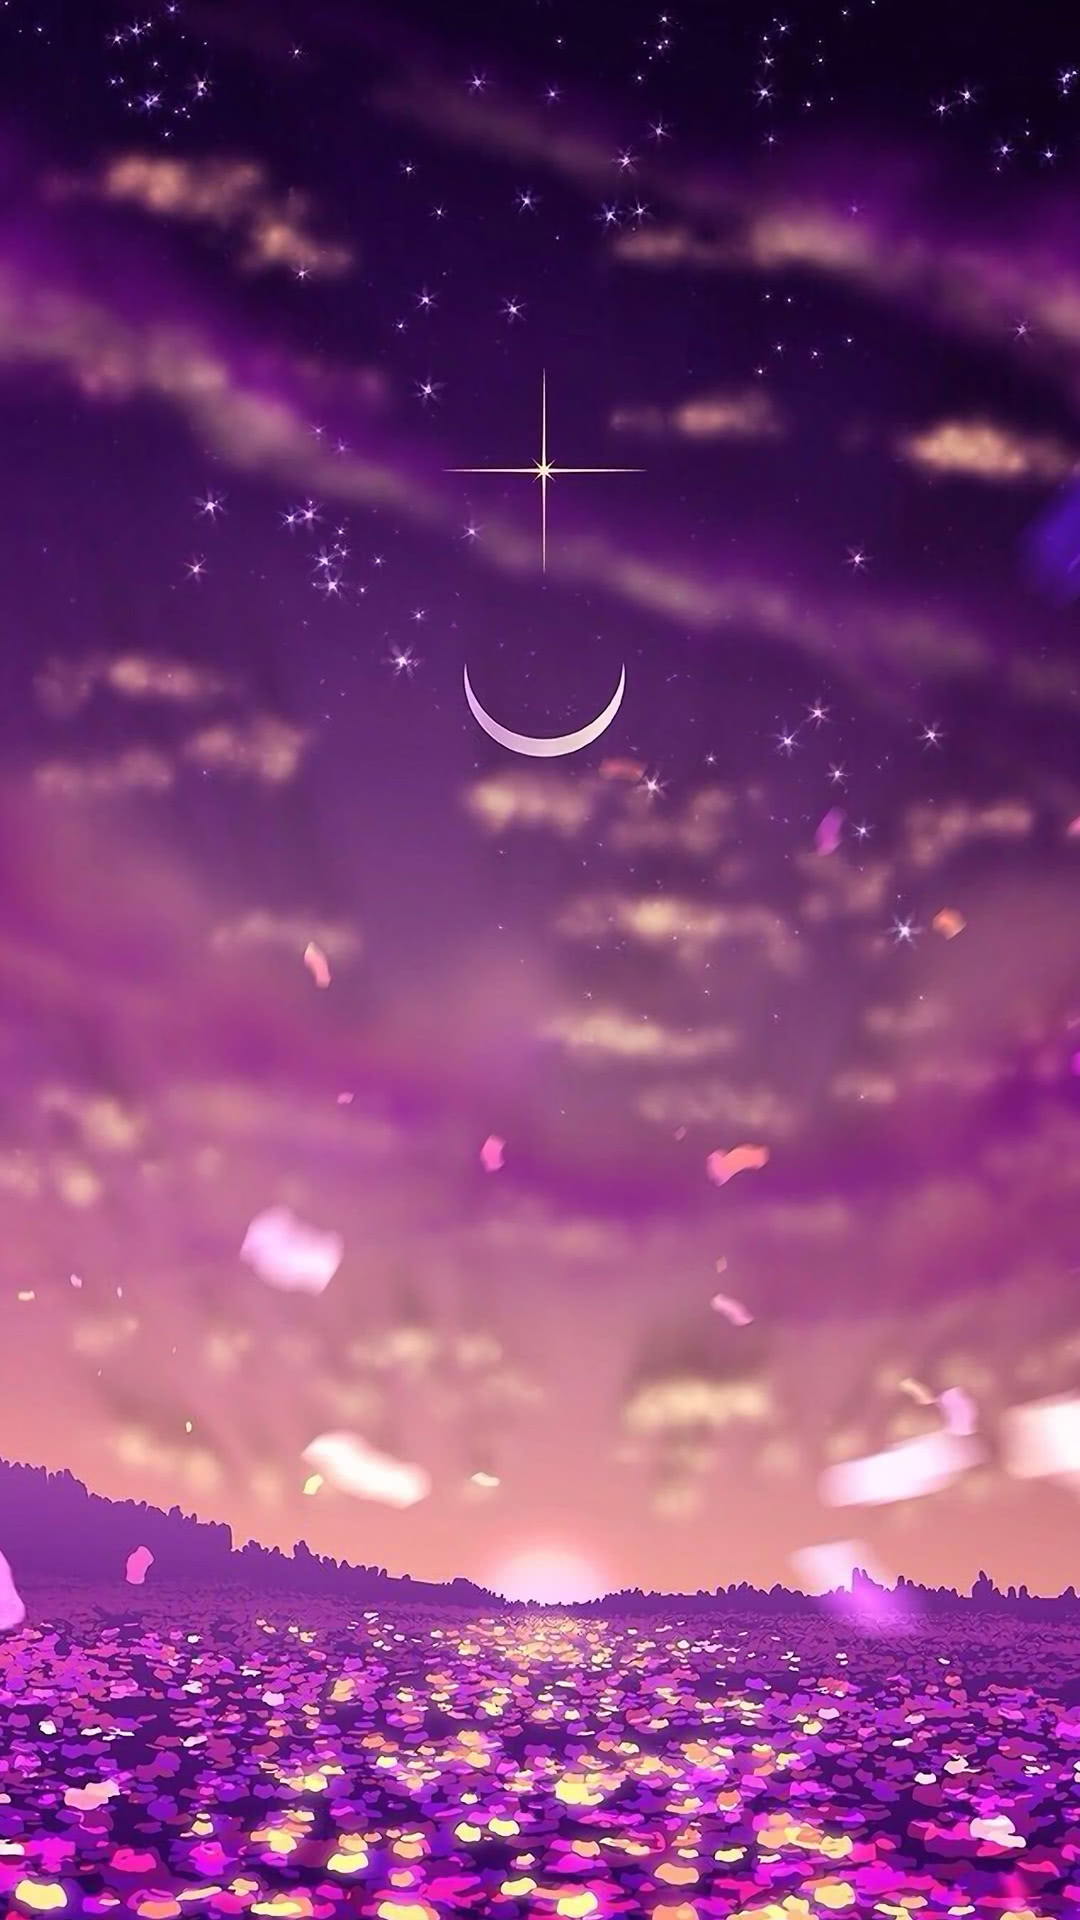 A Field Of Flowers Shining In A Moonlit Night Iphone Wallpapers